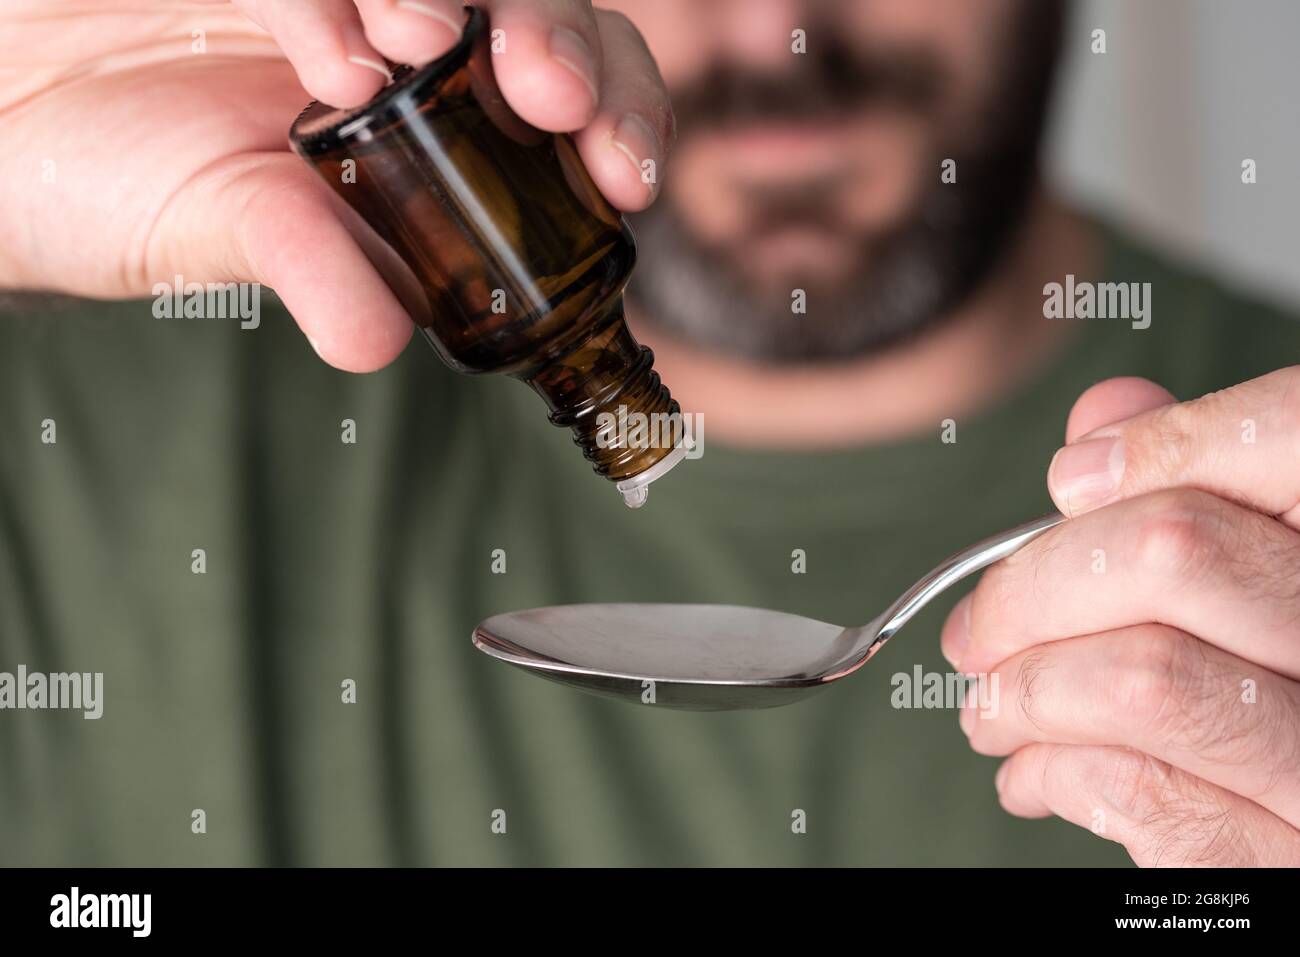 close-up of person dripping liquid medication drops onto spoon Stock Photo